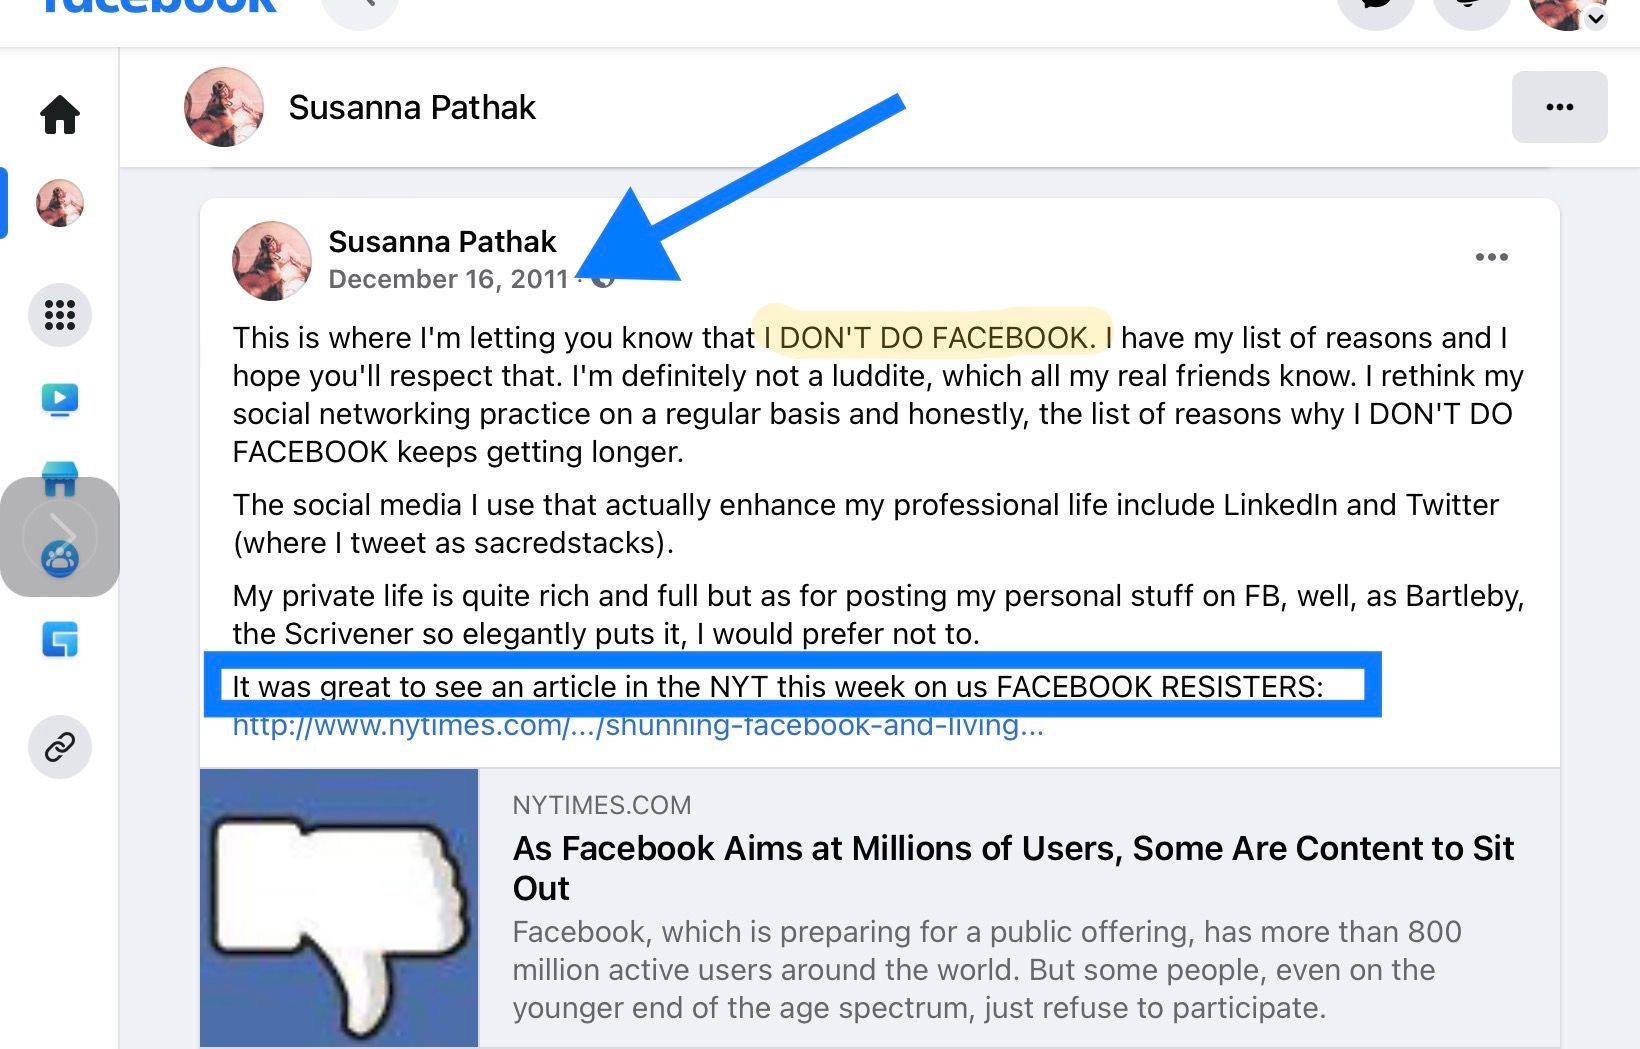 Arrow pointing to Facebook page with for Susanna Pathak, December 16, 2011 and message starting with “This is where I’m letting you know that I don’t do facebook…” followed by 3 paragraphs of reasons and showing snip of a New York Times article titled “As Facebook Aims at Millions of Users, Some Are Content to Sit Out” with a thumbs down logo